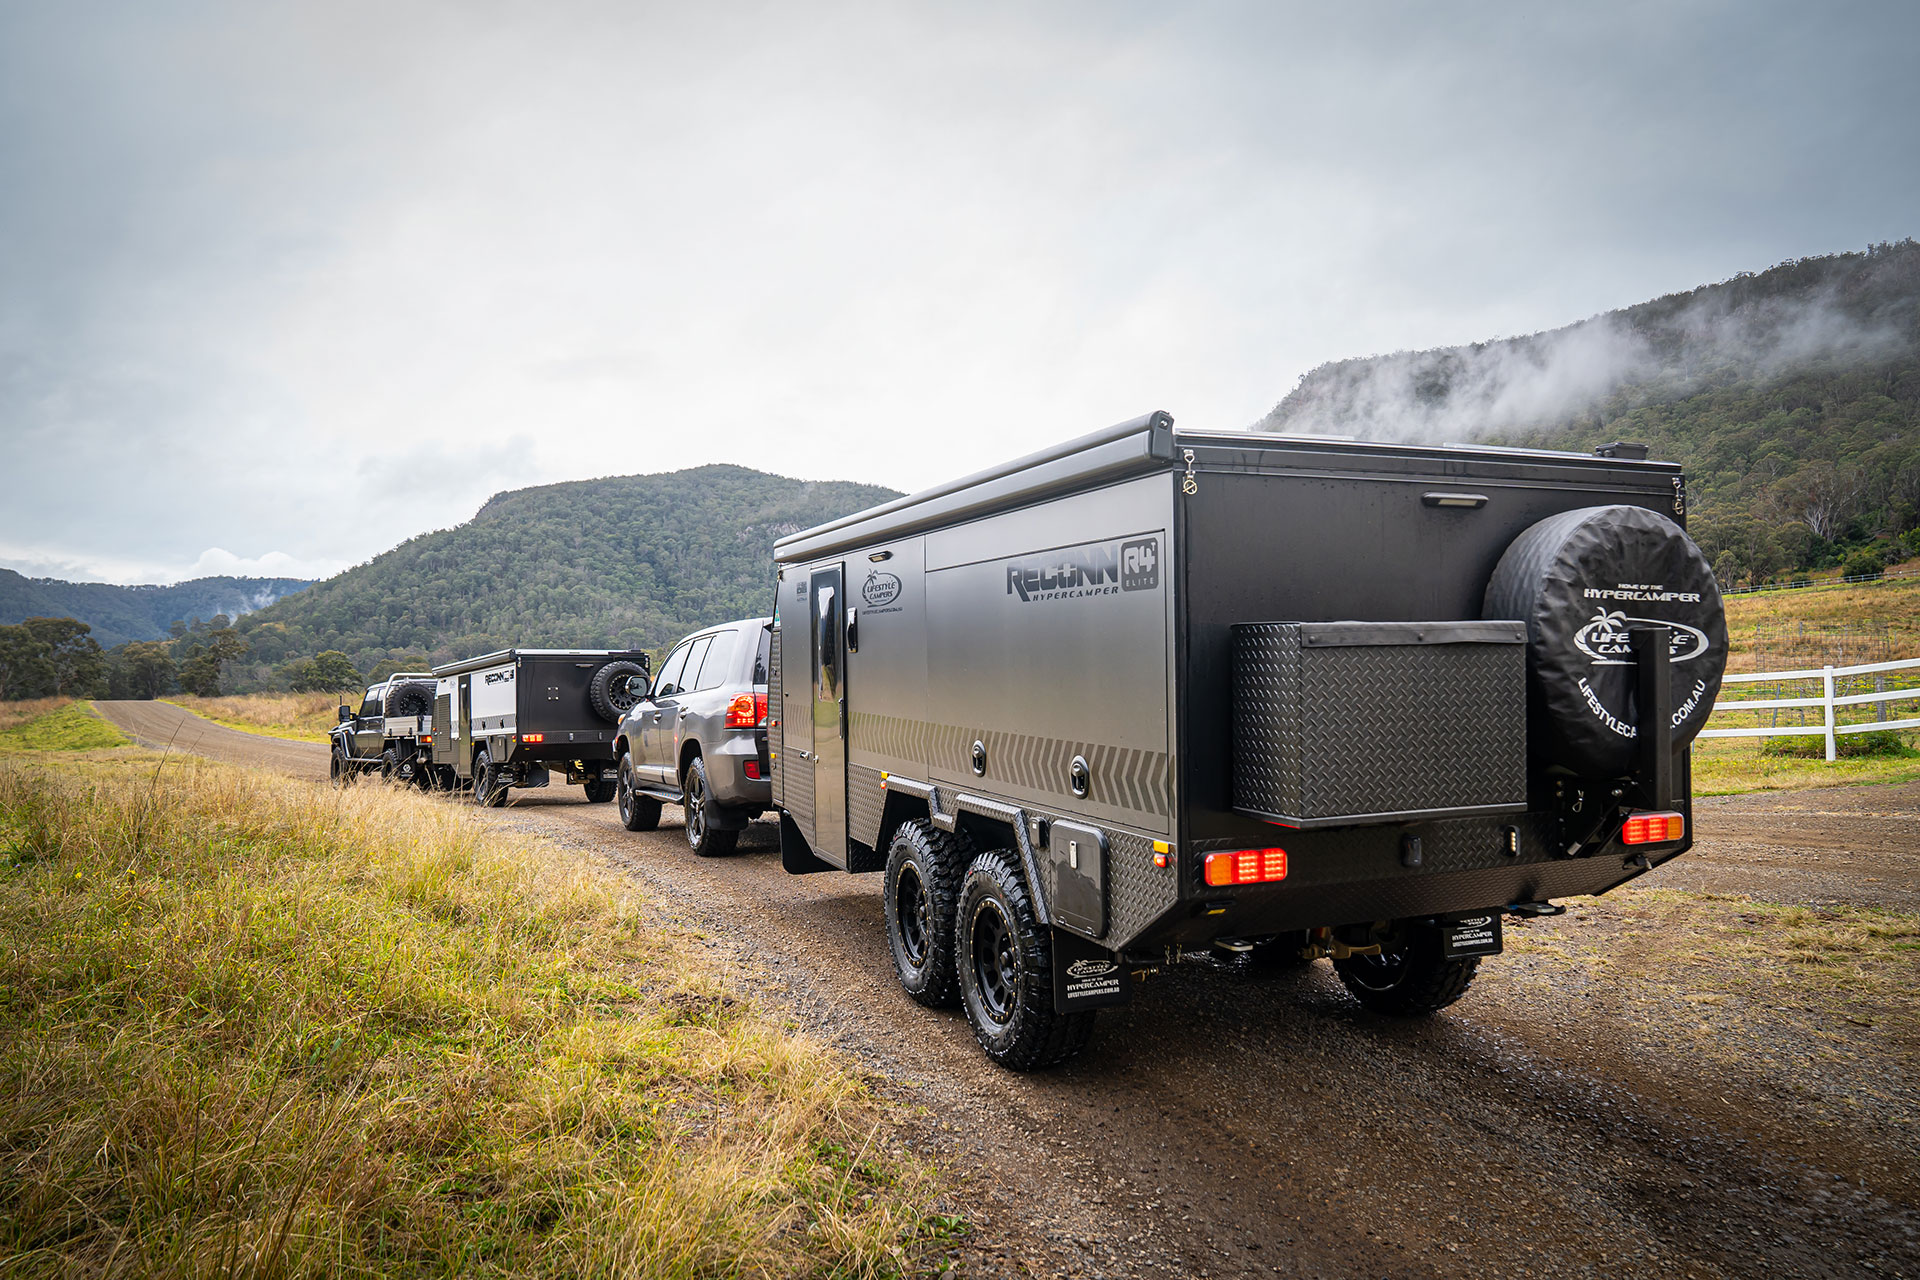 Lifestyle Expedition Vehicles